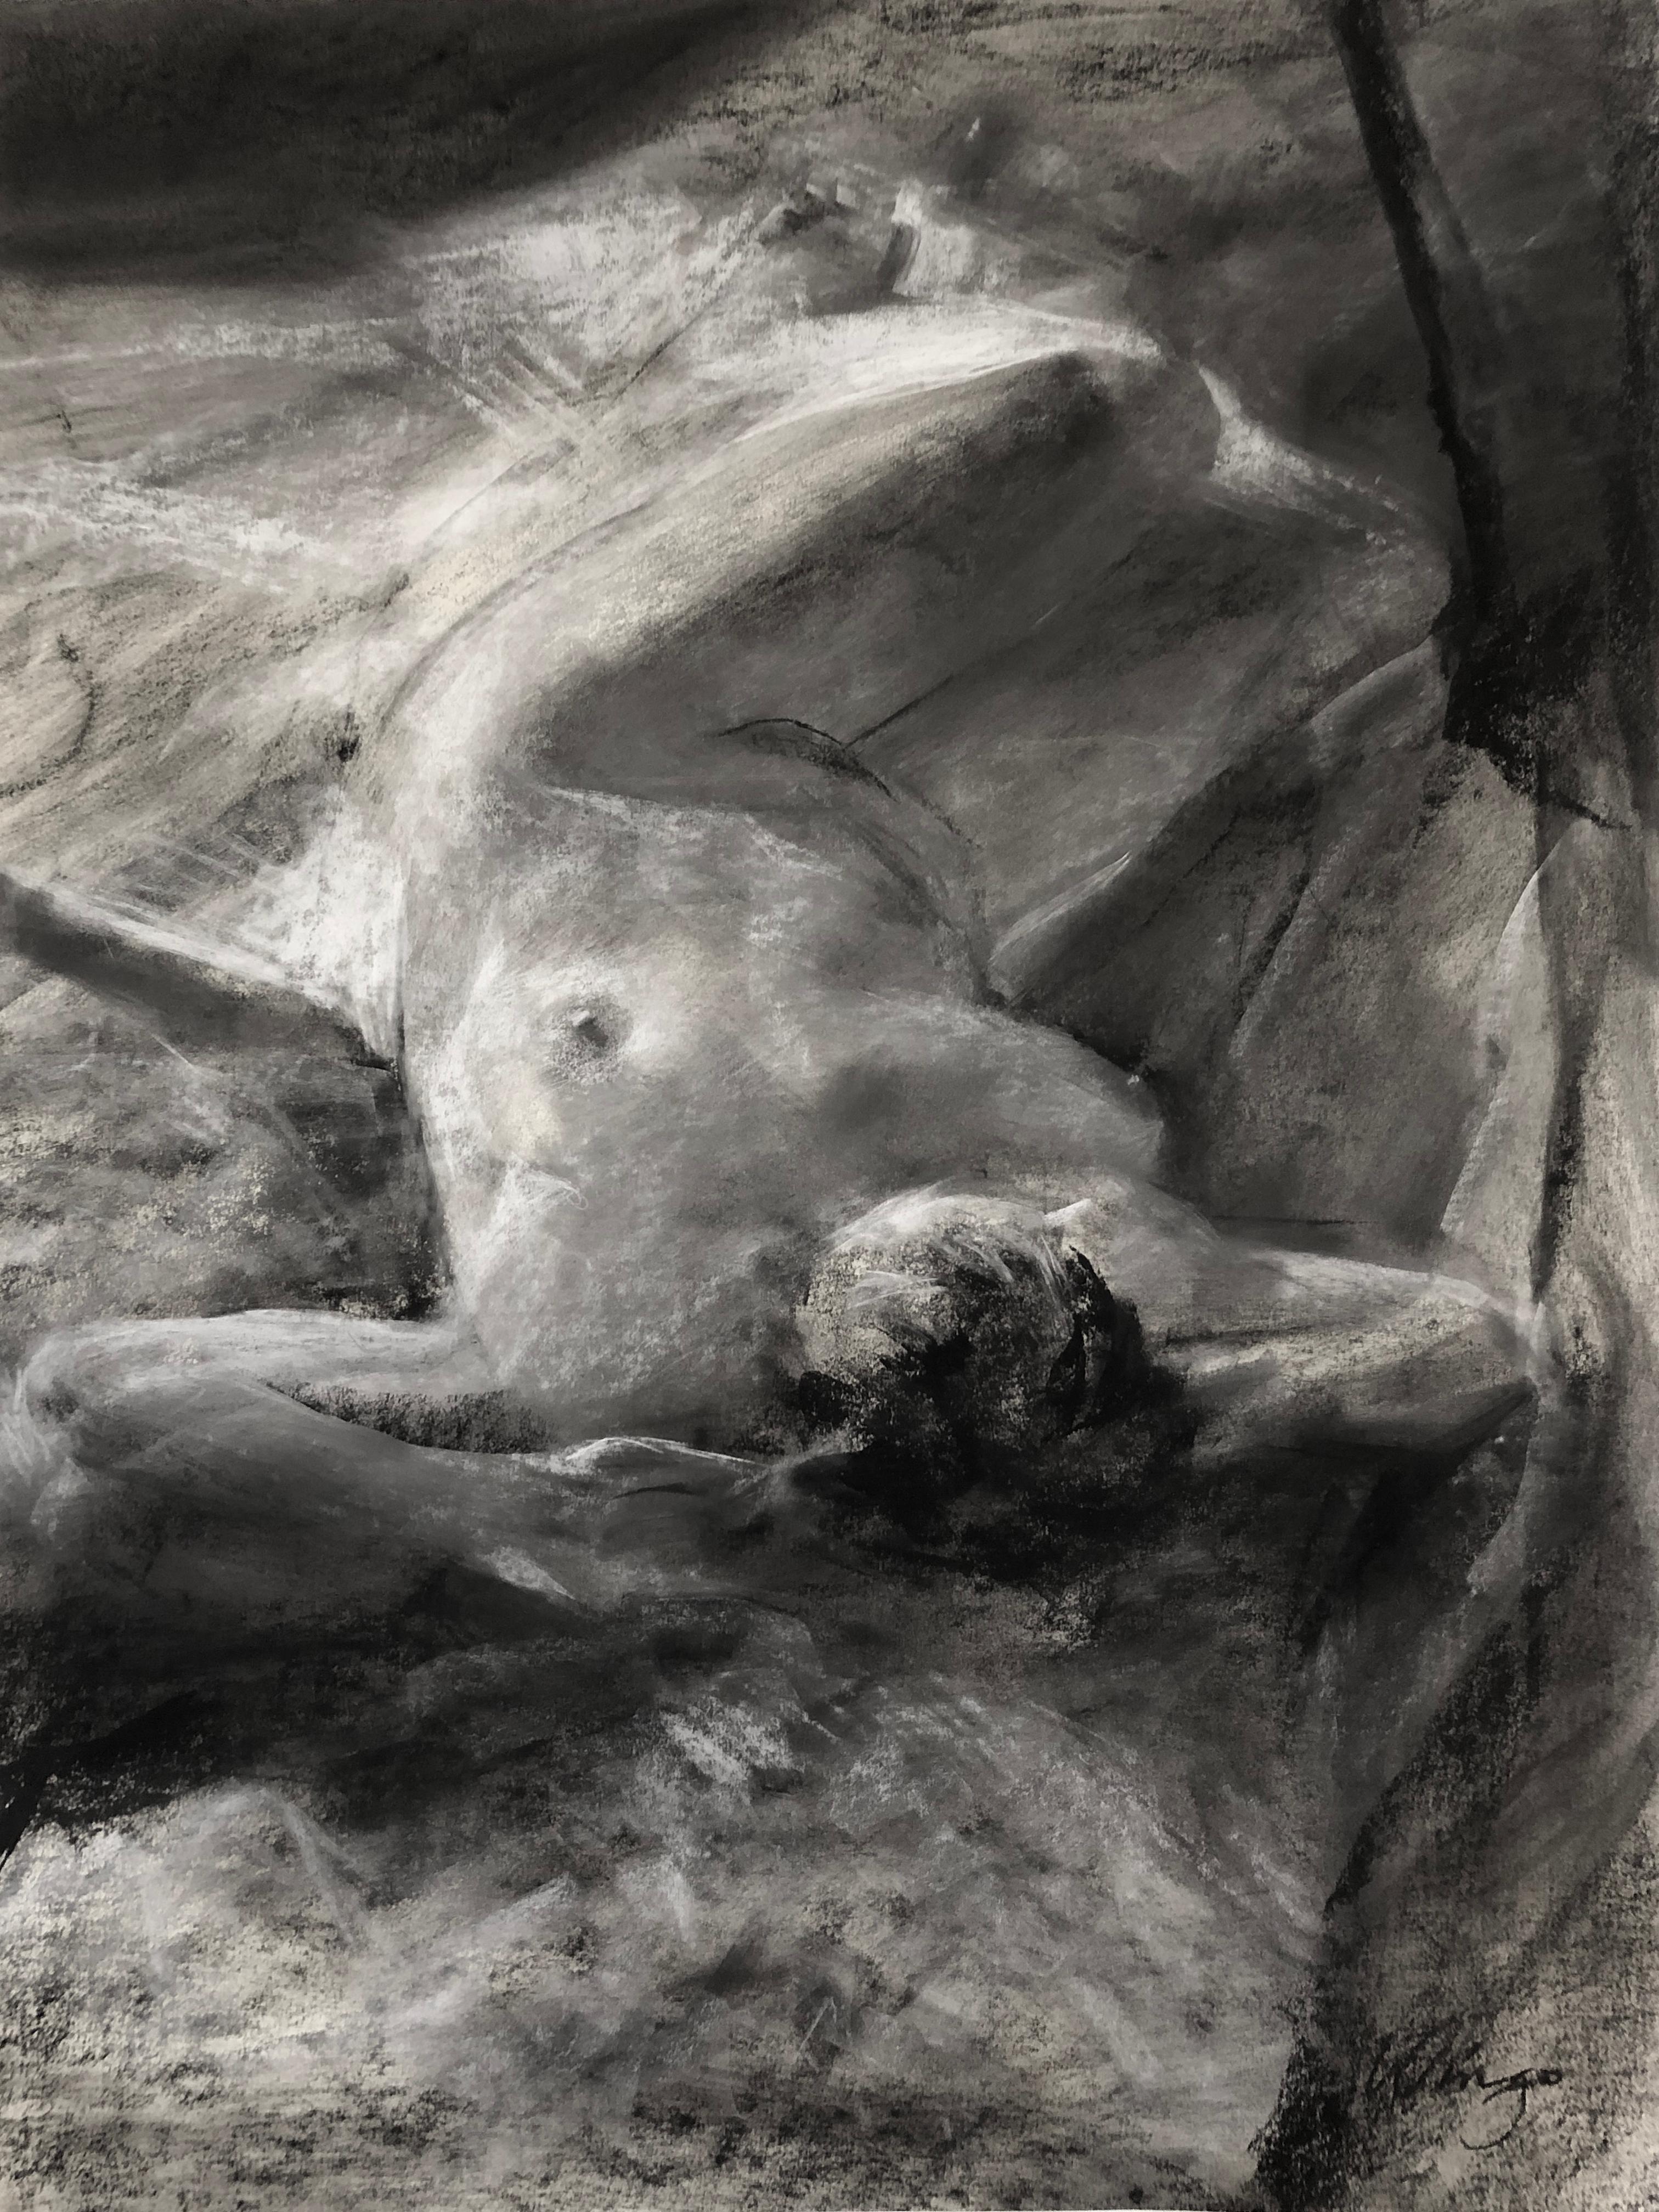 In this charcoal drawing by Paul Wingo, the female nude lays in repose on a white sleeping surface with the upper body positioned at the bottom of the drawing. The realistic drawing of the figure in charcoal and conté is delicately handled by the